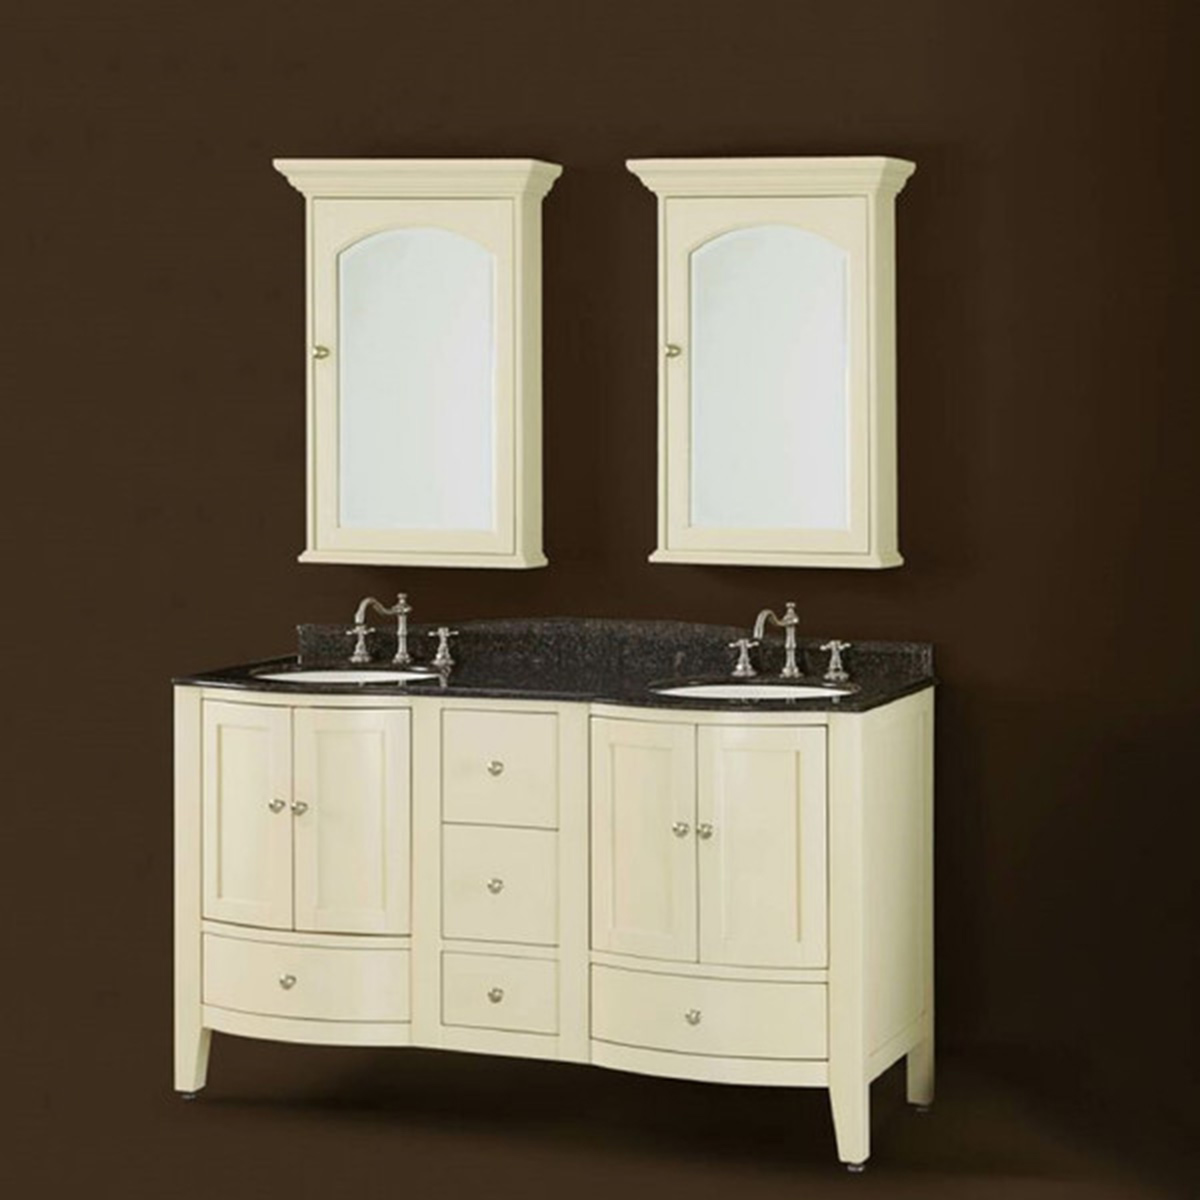 Chelsea Home Loft 60-inch Vanity with Medicine Cabinet - Ivory